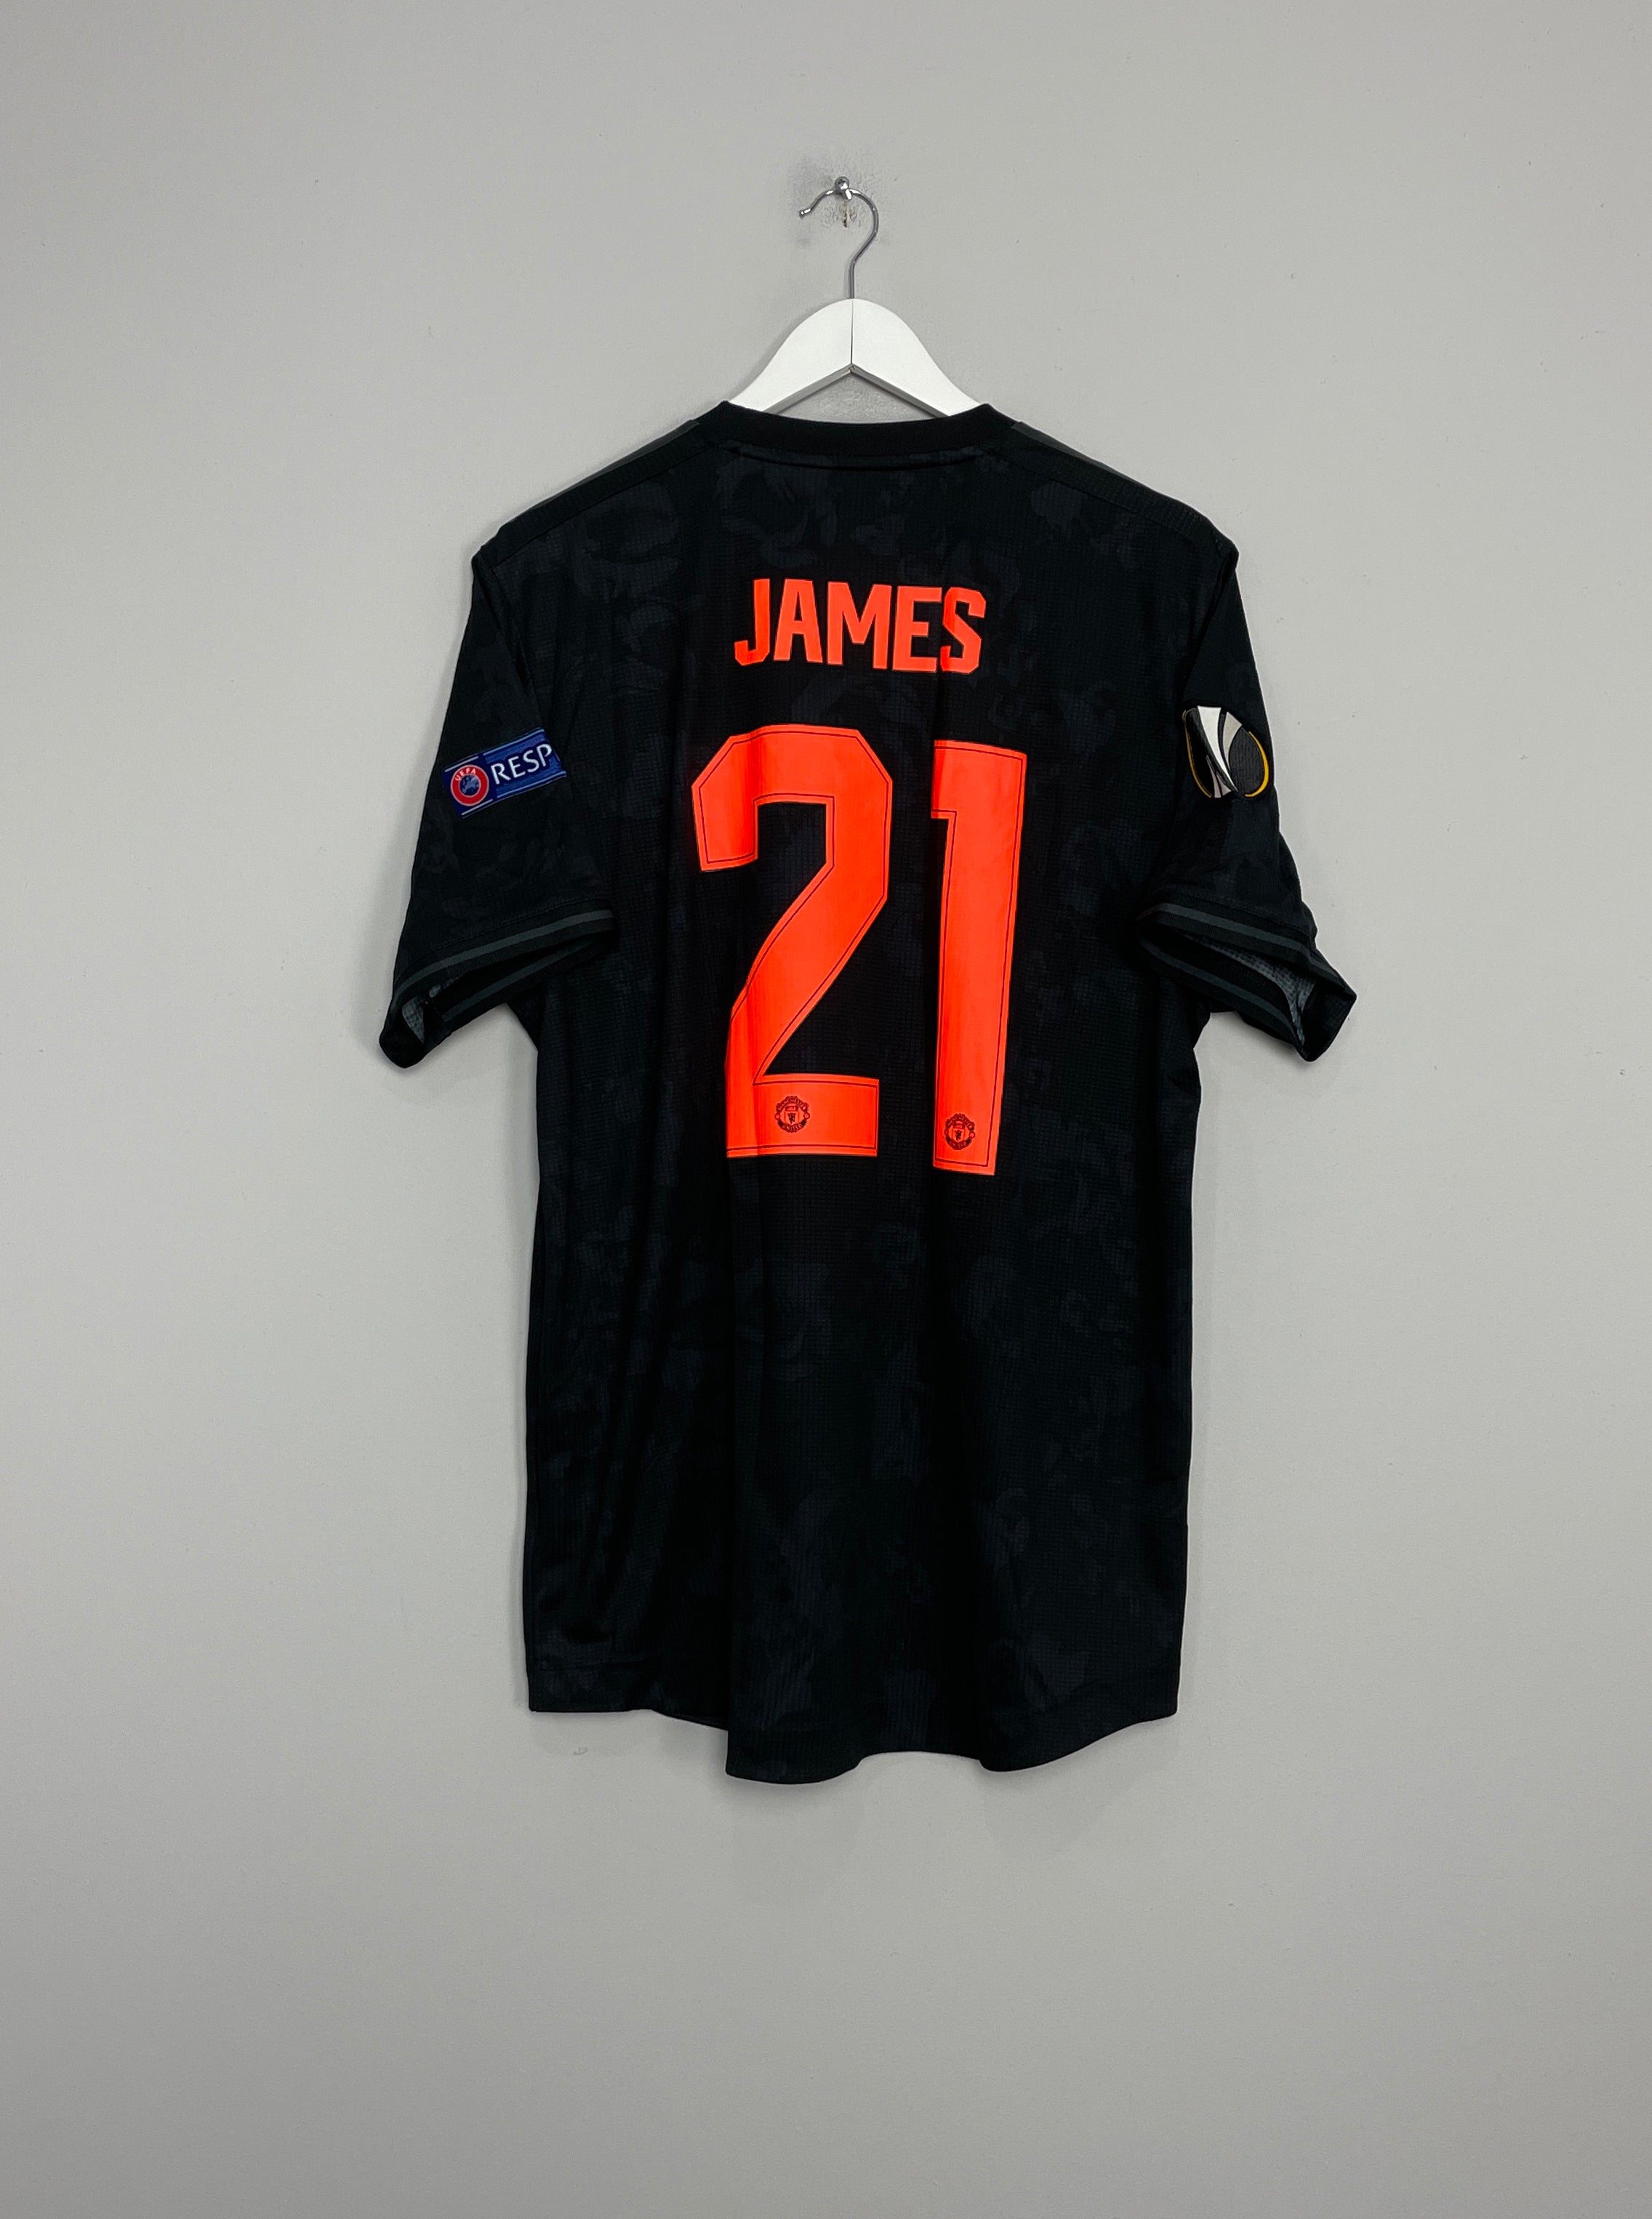 2019/20 MANCHESTER UNITED JAMES #21 *PLAYER ISSUE AUTHENTIC* THIRD SHIRT (XL) ADIDAS